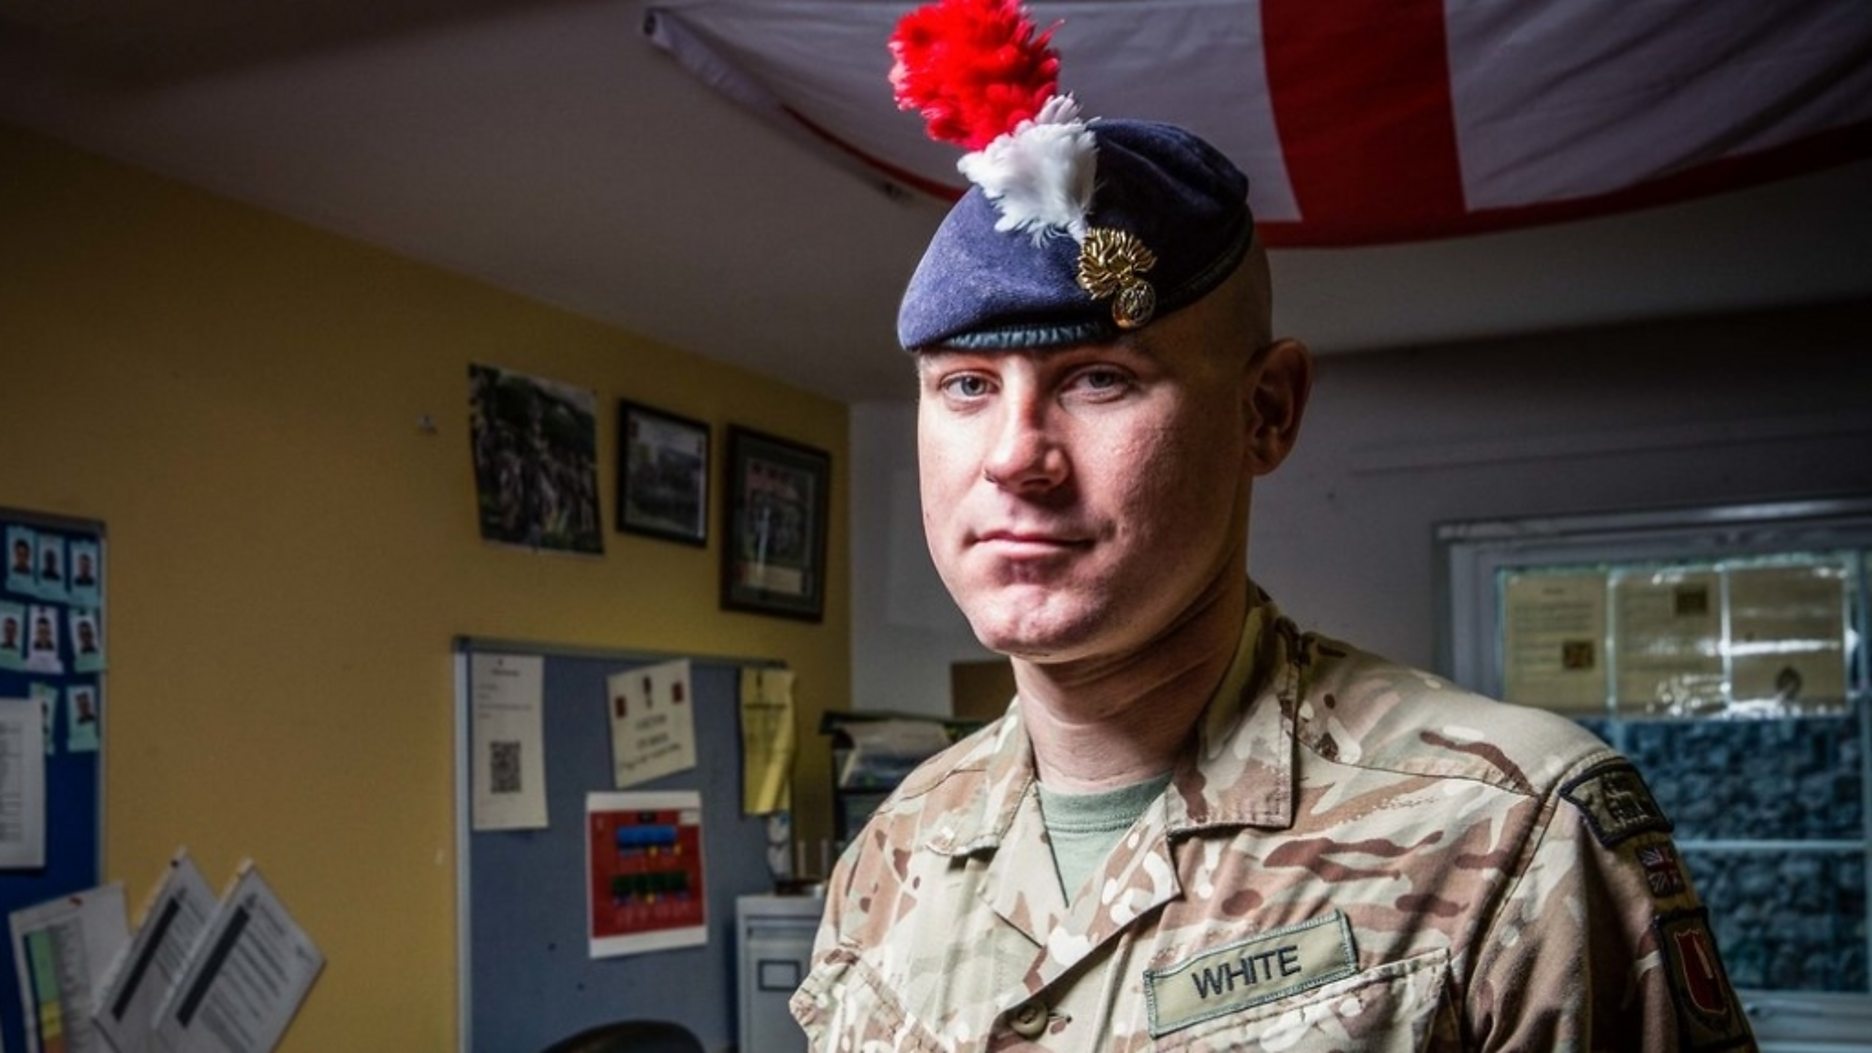 Meet Corporal Philip White from the BBC One Soldier Training Team